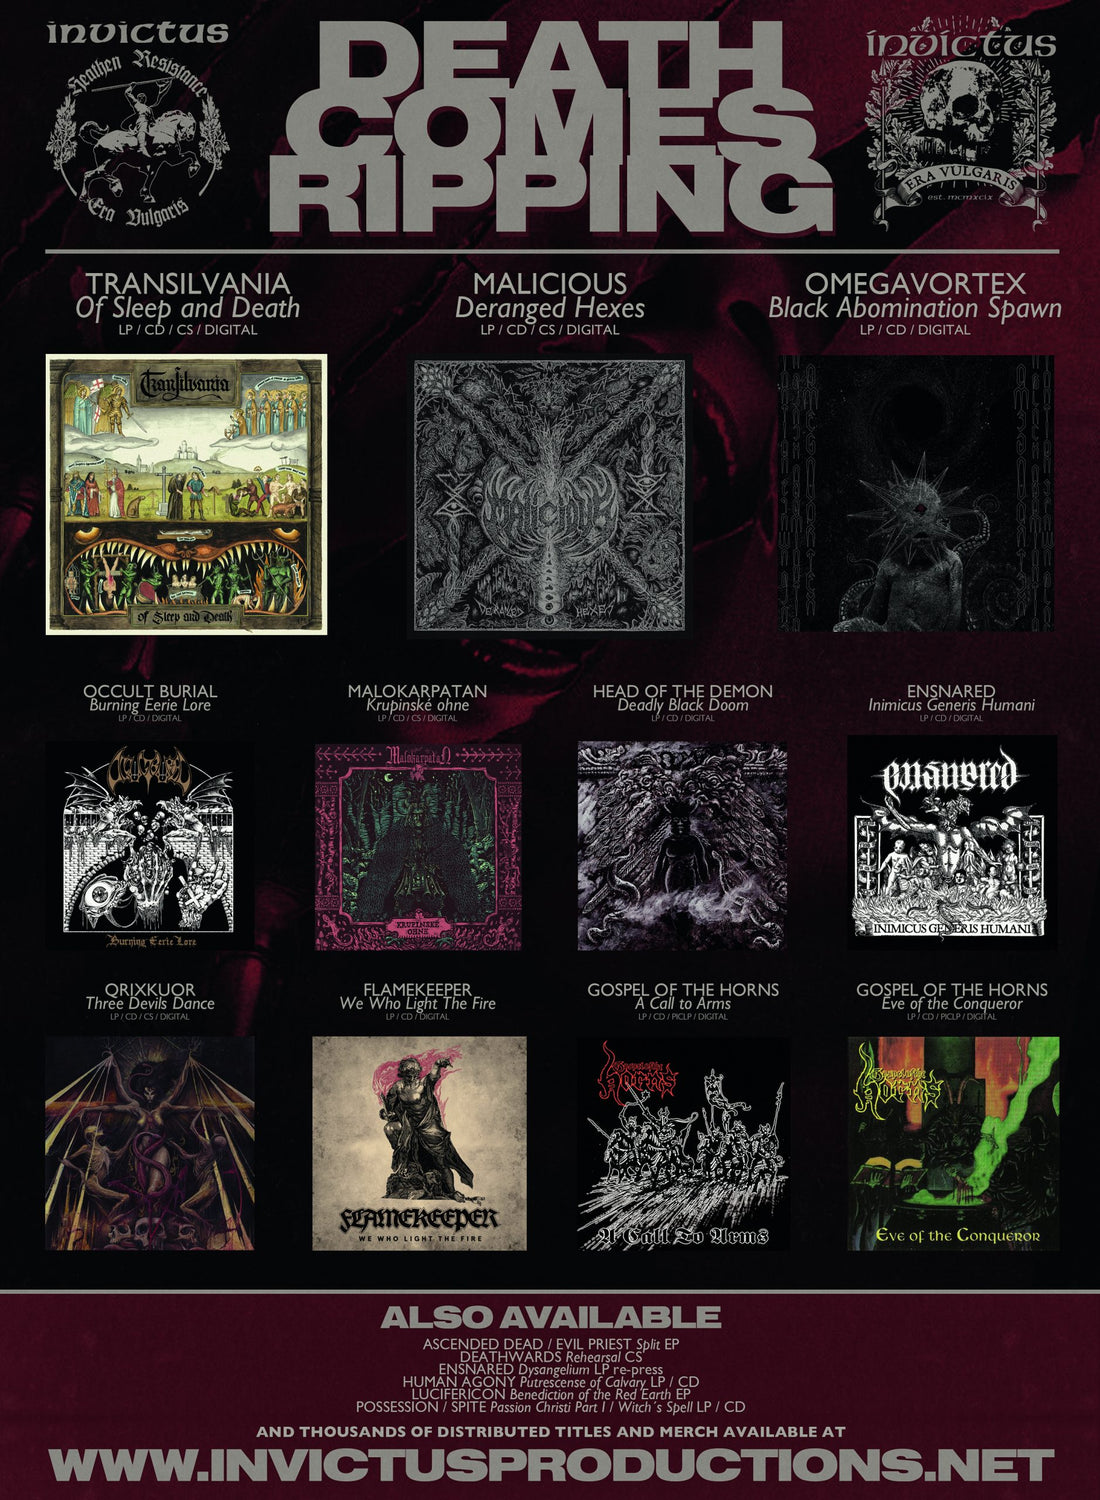 Death Comes Ripping! Upcoming, current and recent releases on Invictus.